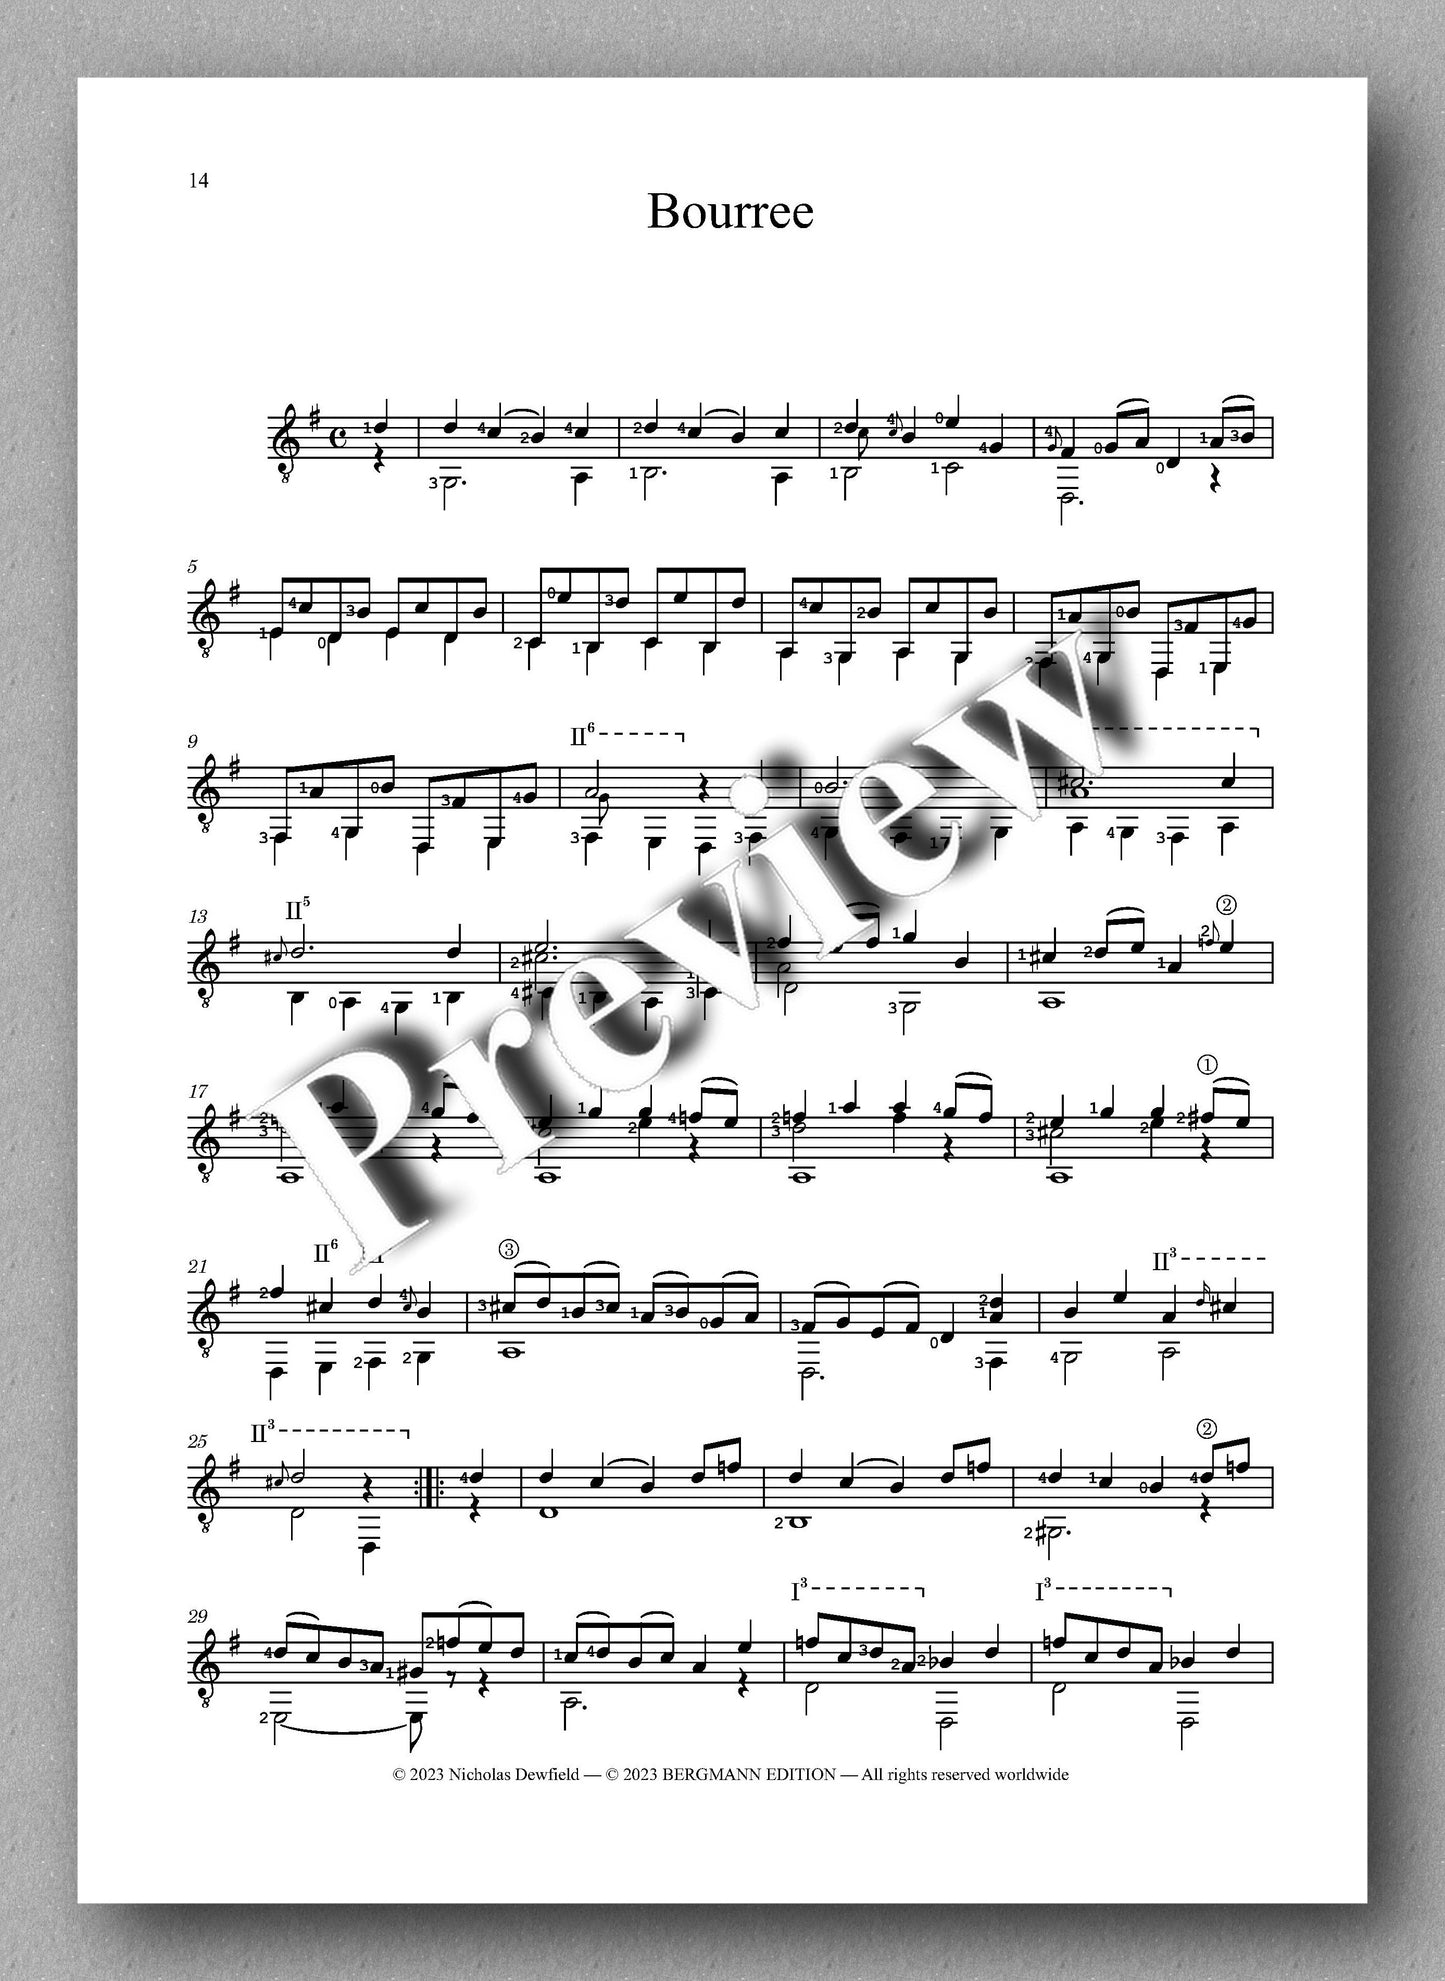 Sylvius Leopold Weiss (1687-1750), Sonata No. 22 - preview of the music score 4